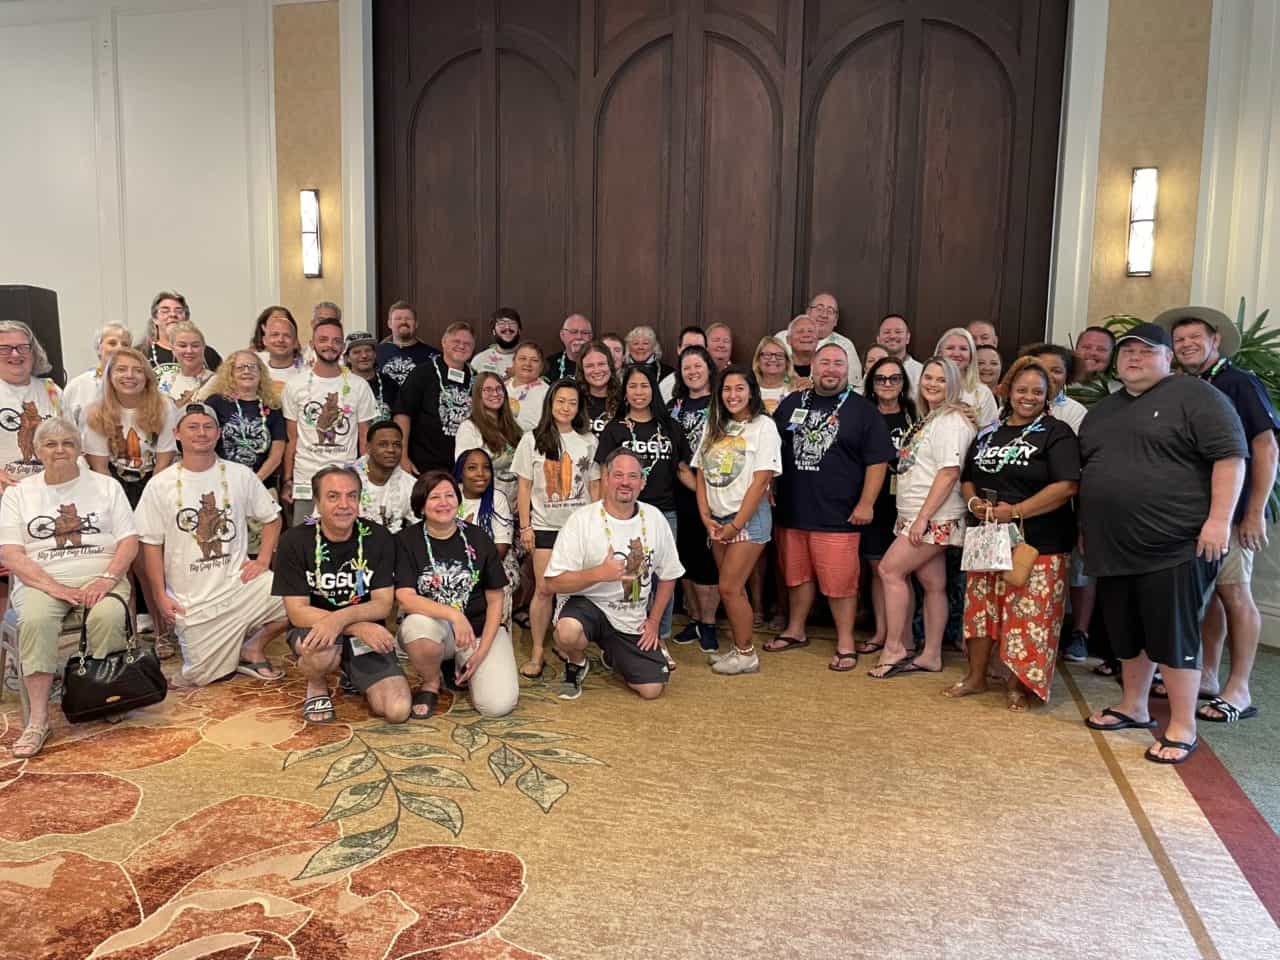 Mark Jacoby and our 60 winners of a 6-day adventure in Honolulu, Hawaii